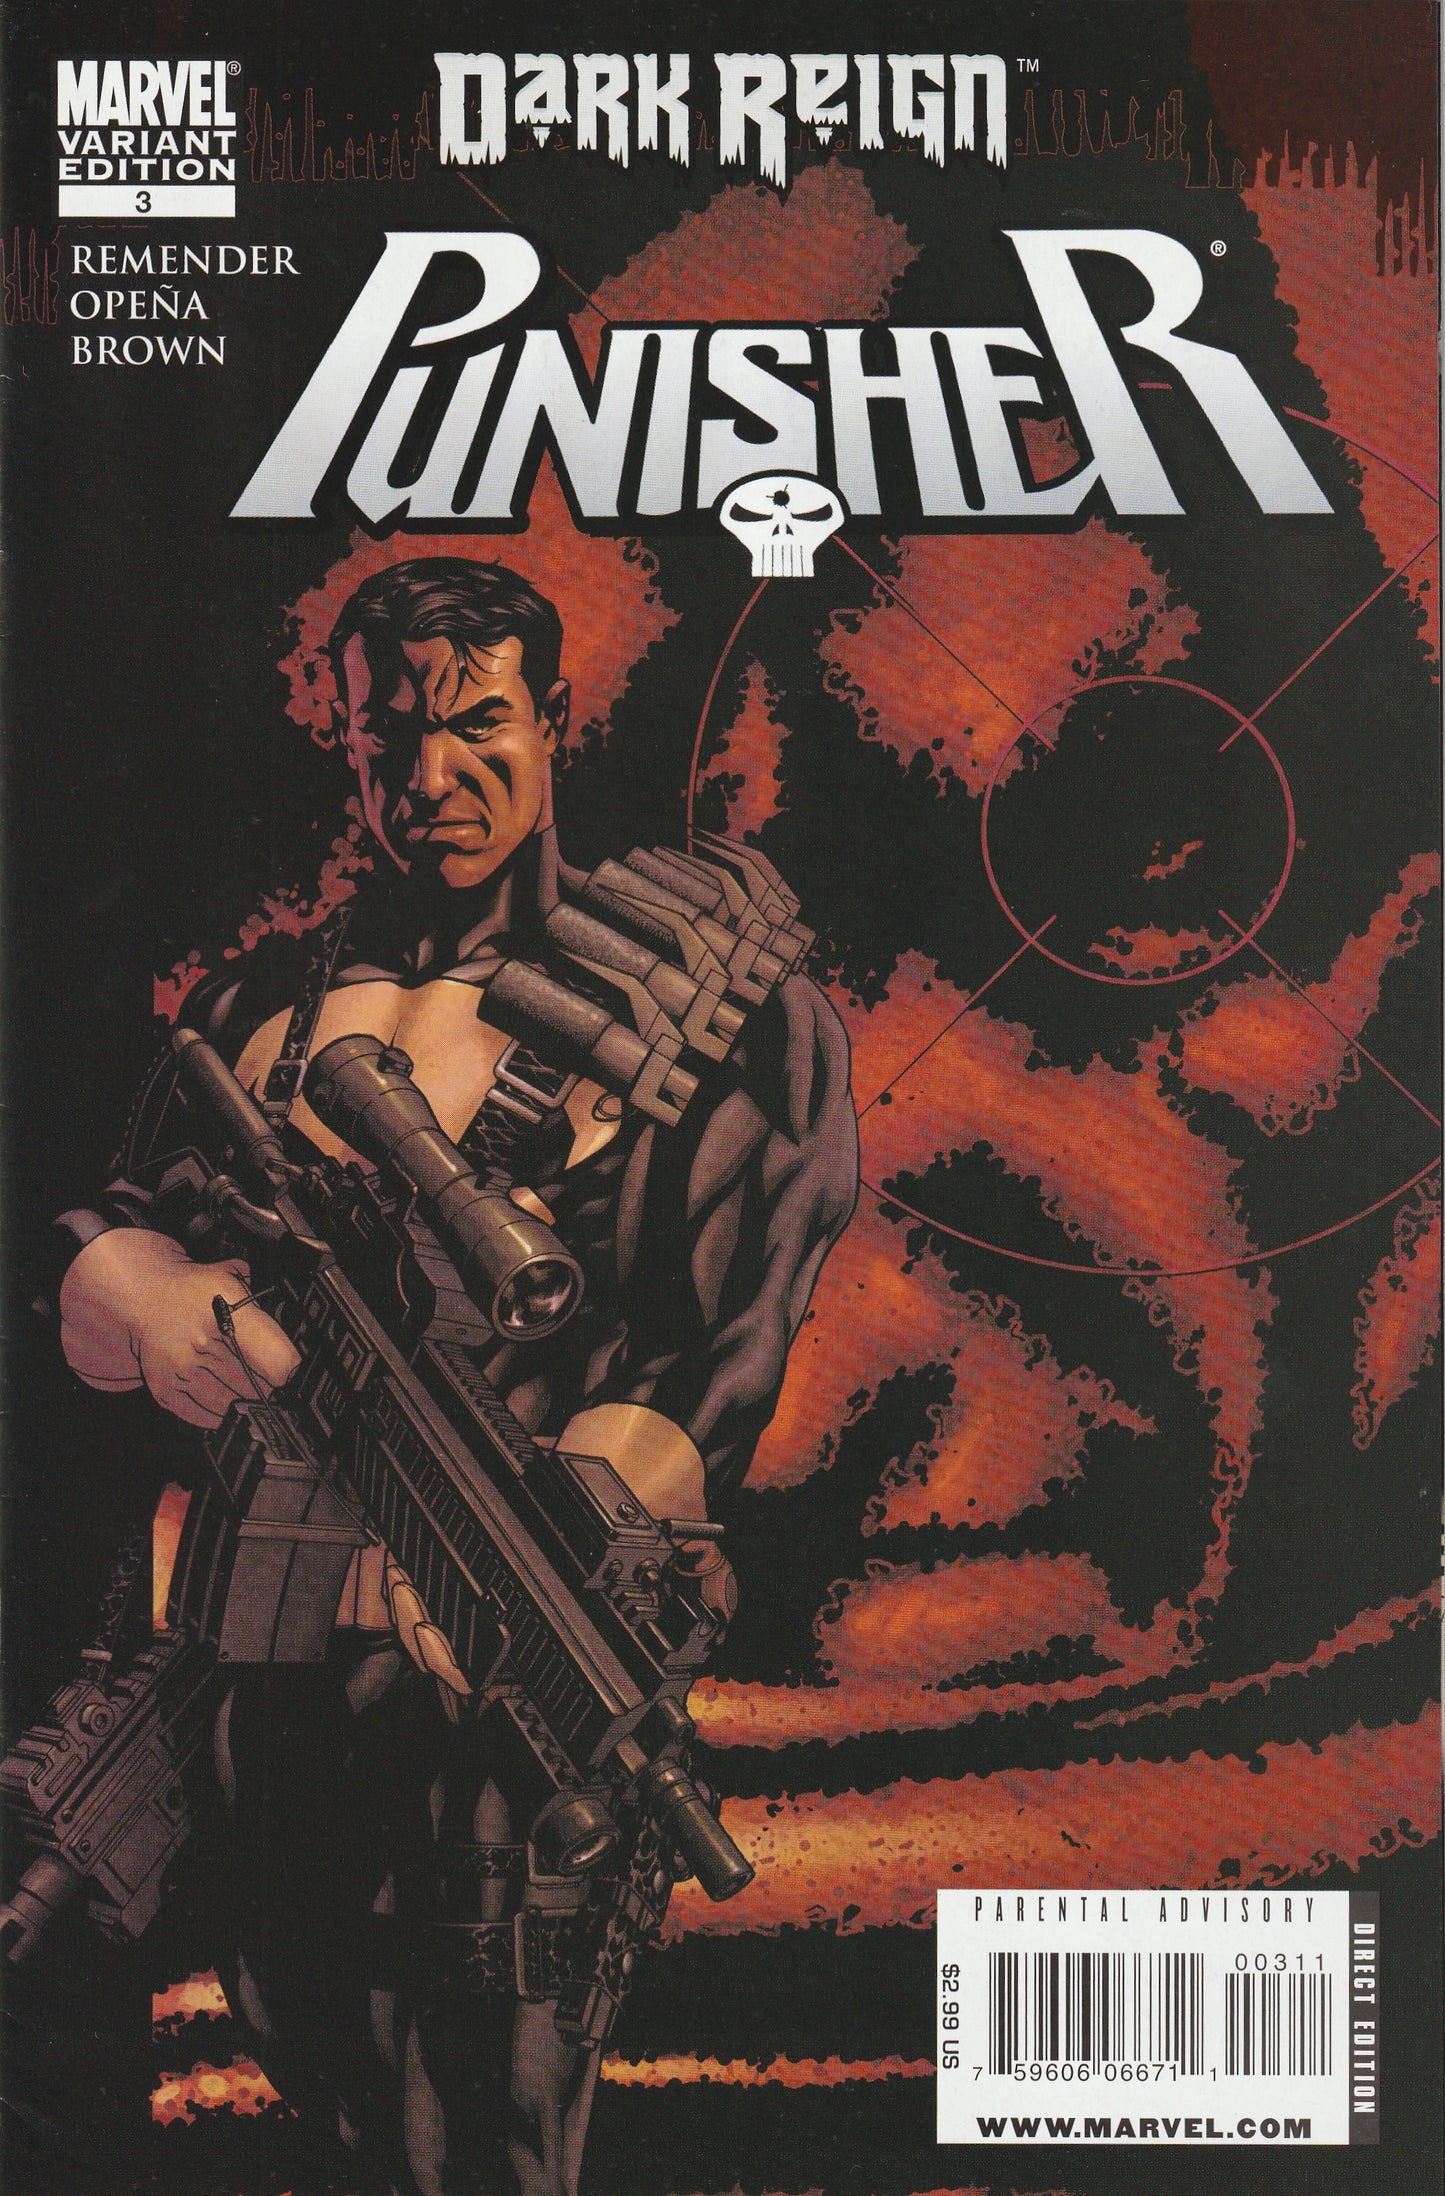 The Punisher #3 (Vol 8, 2009) - Variant Target the Hood Cover